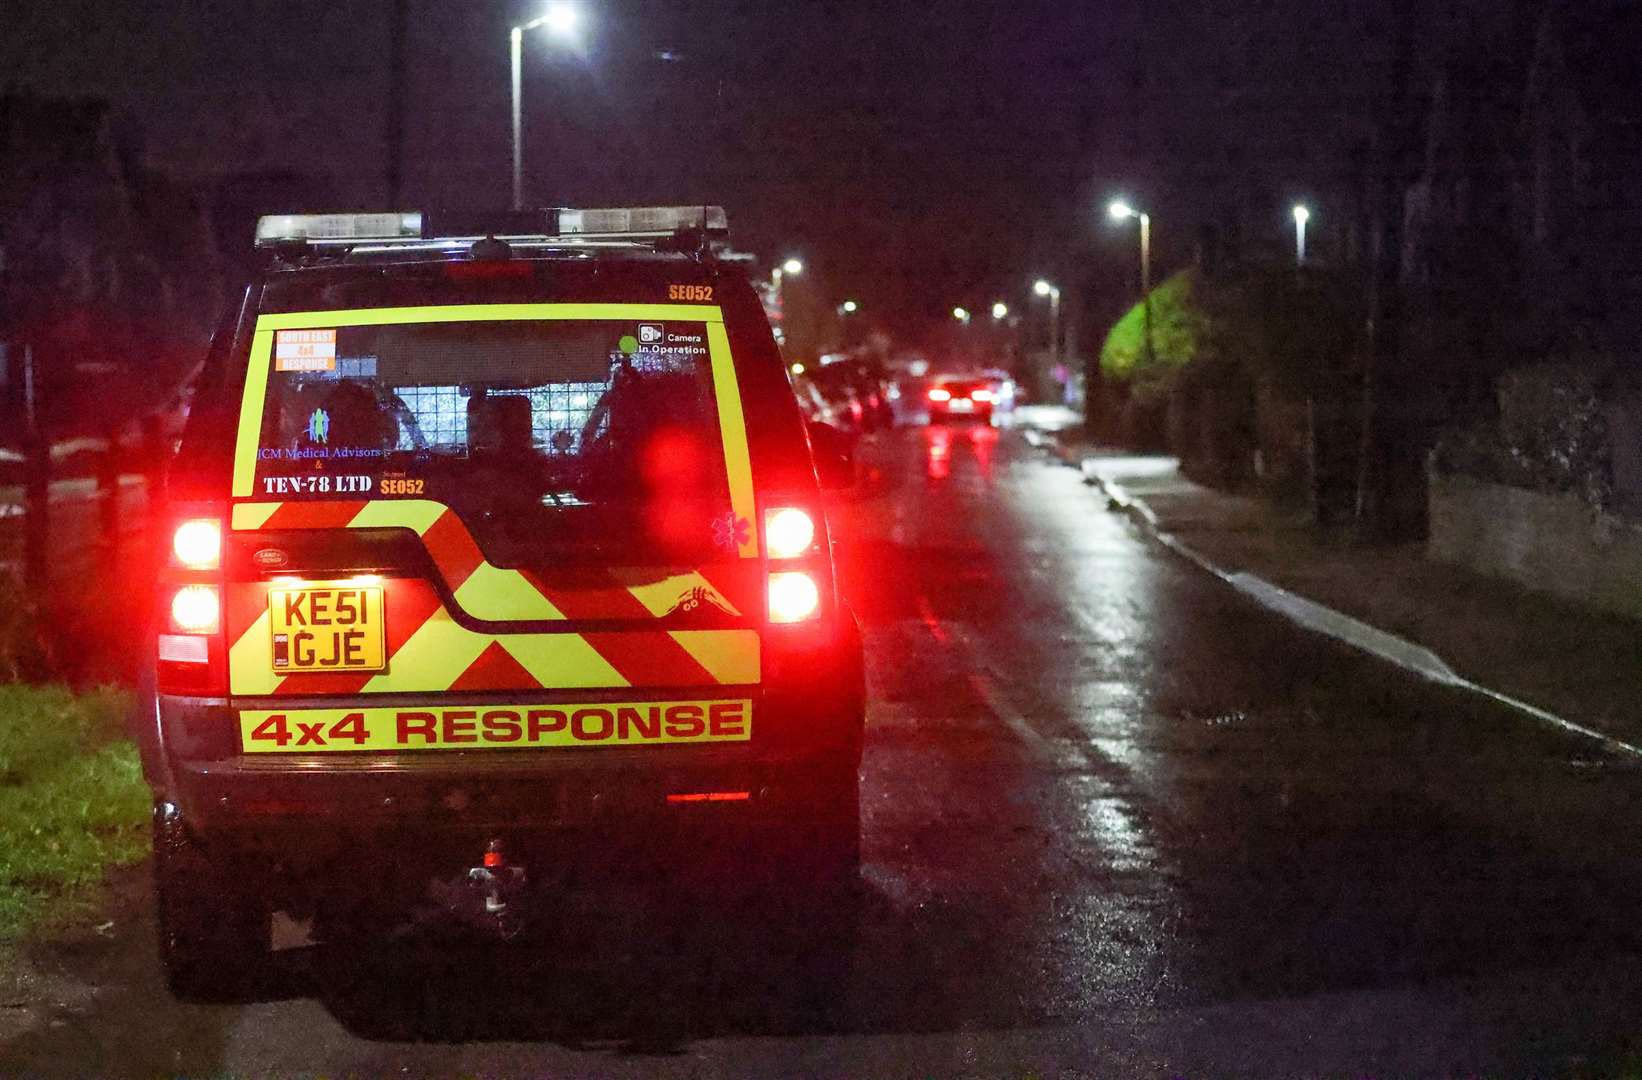 Search teams were sent out last night. Picture: UKNIP